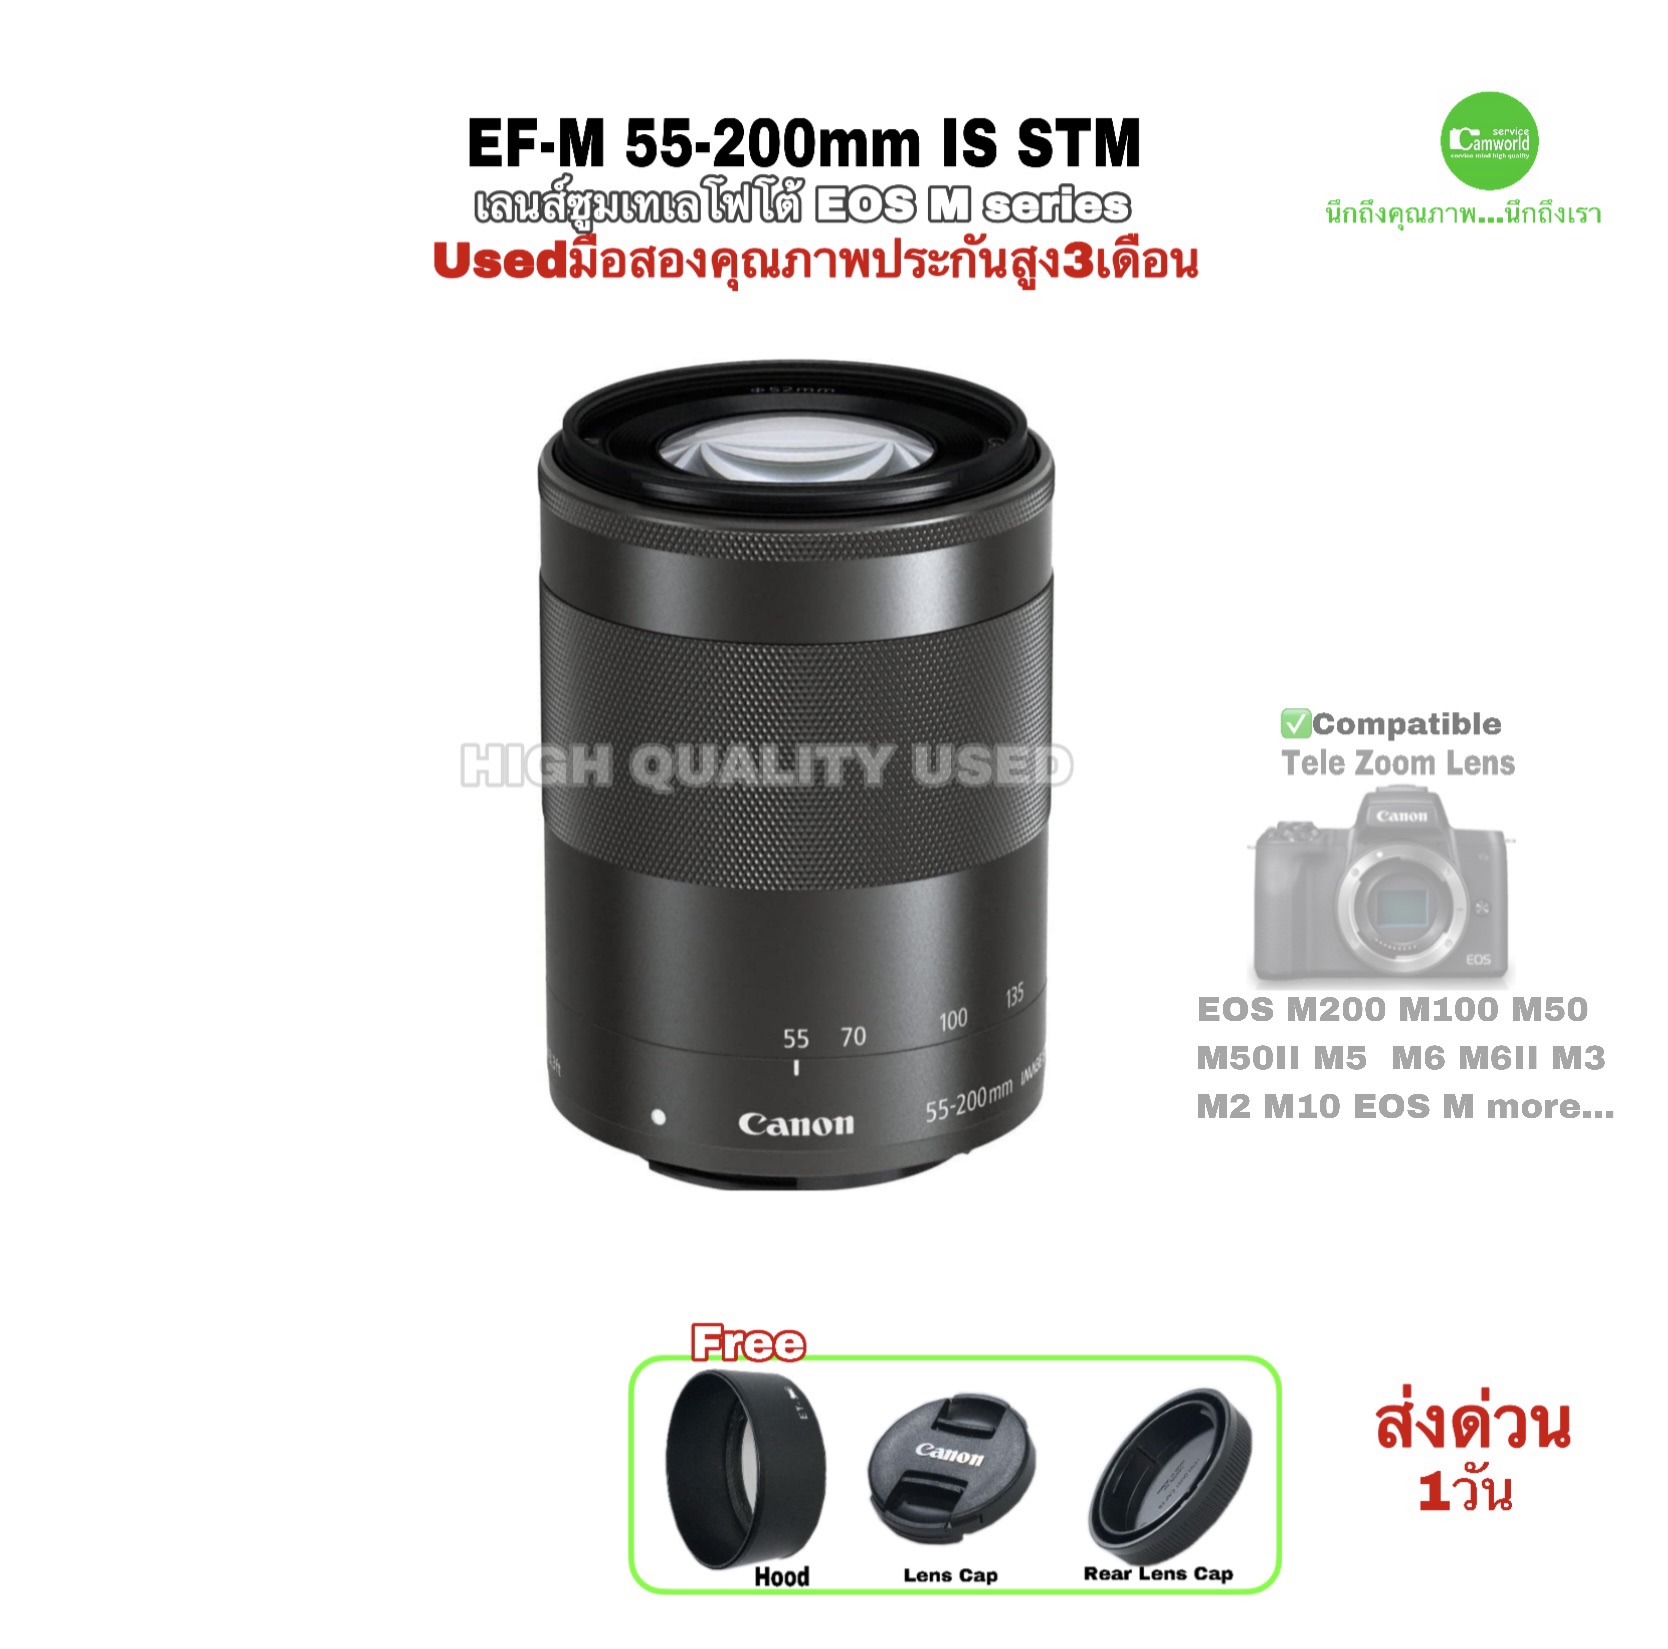 canon ef-m 55-200mm IS STM